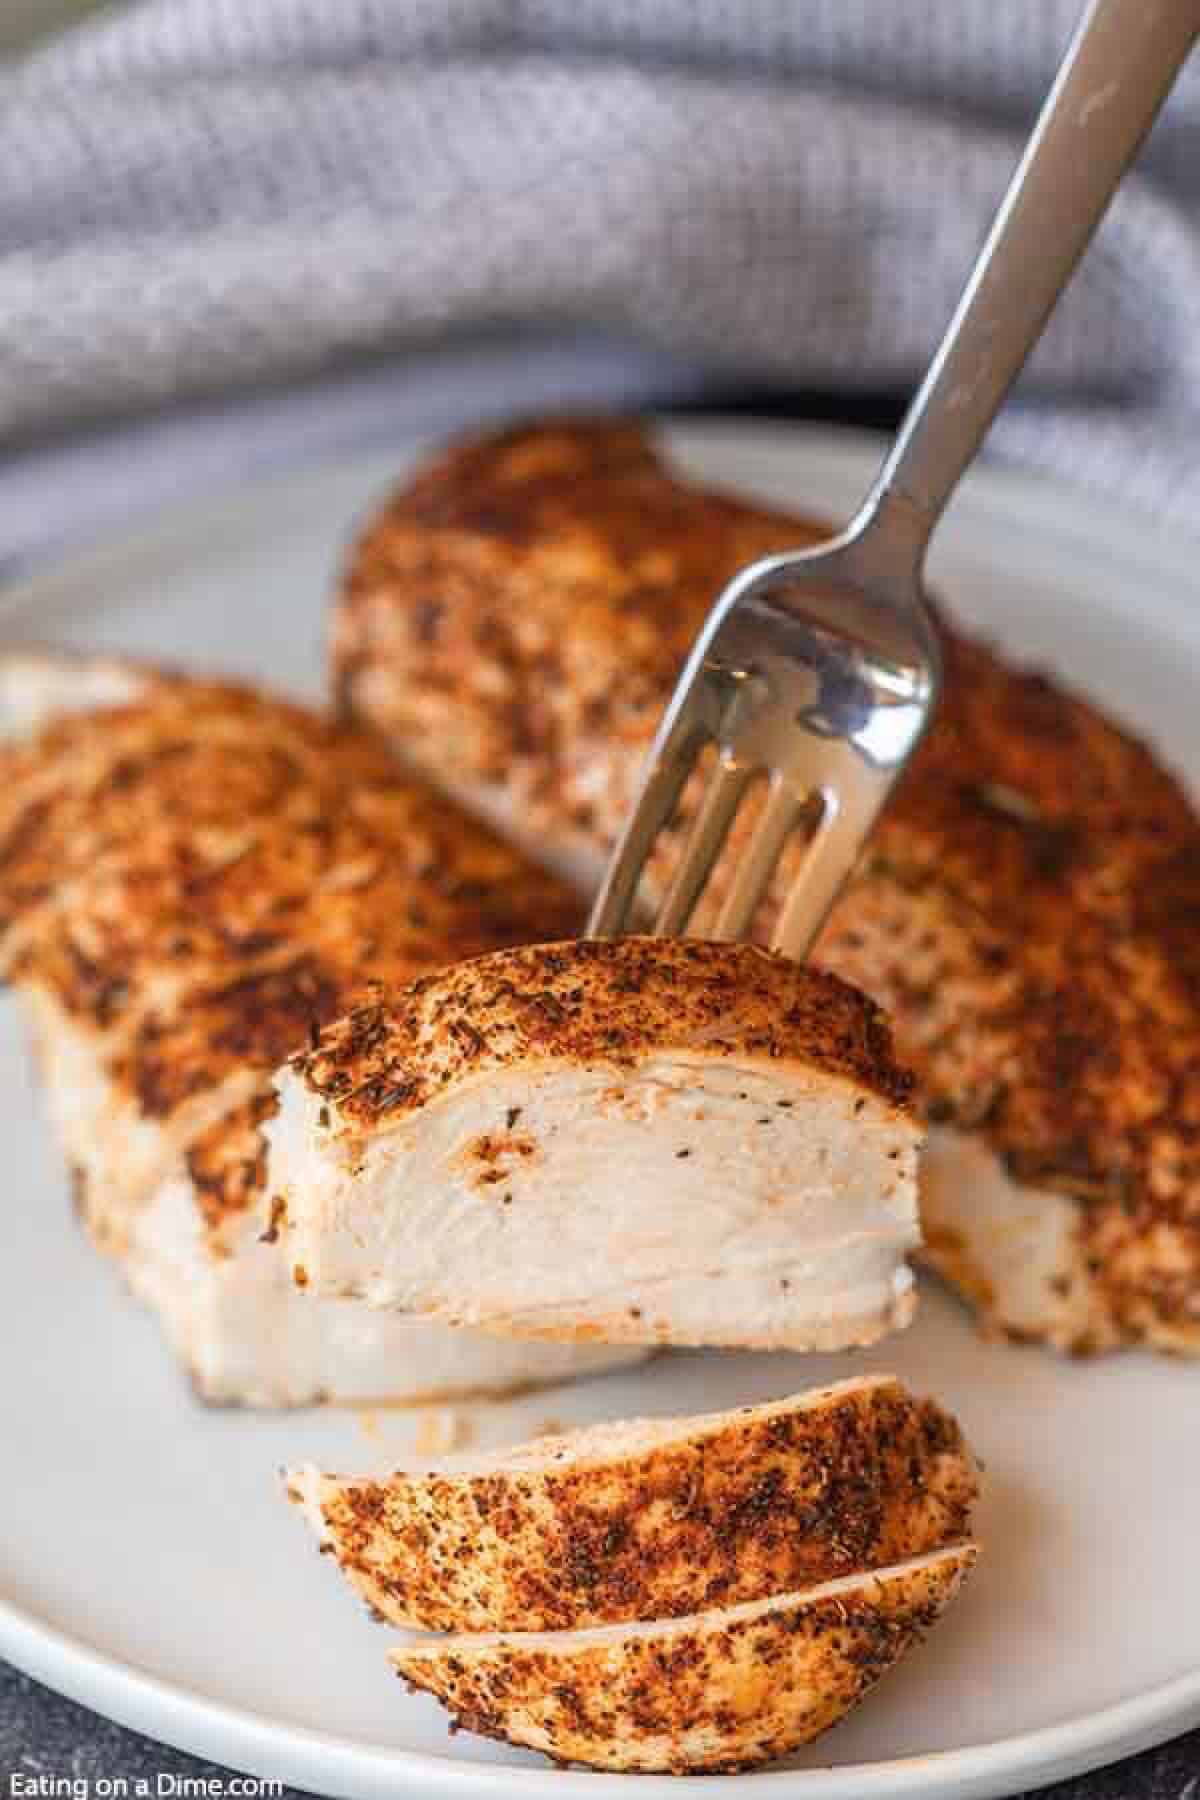 Oven Baked Chicken on a plate sliced with a piece on a fork